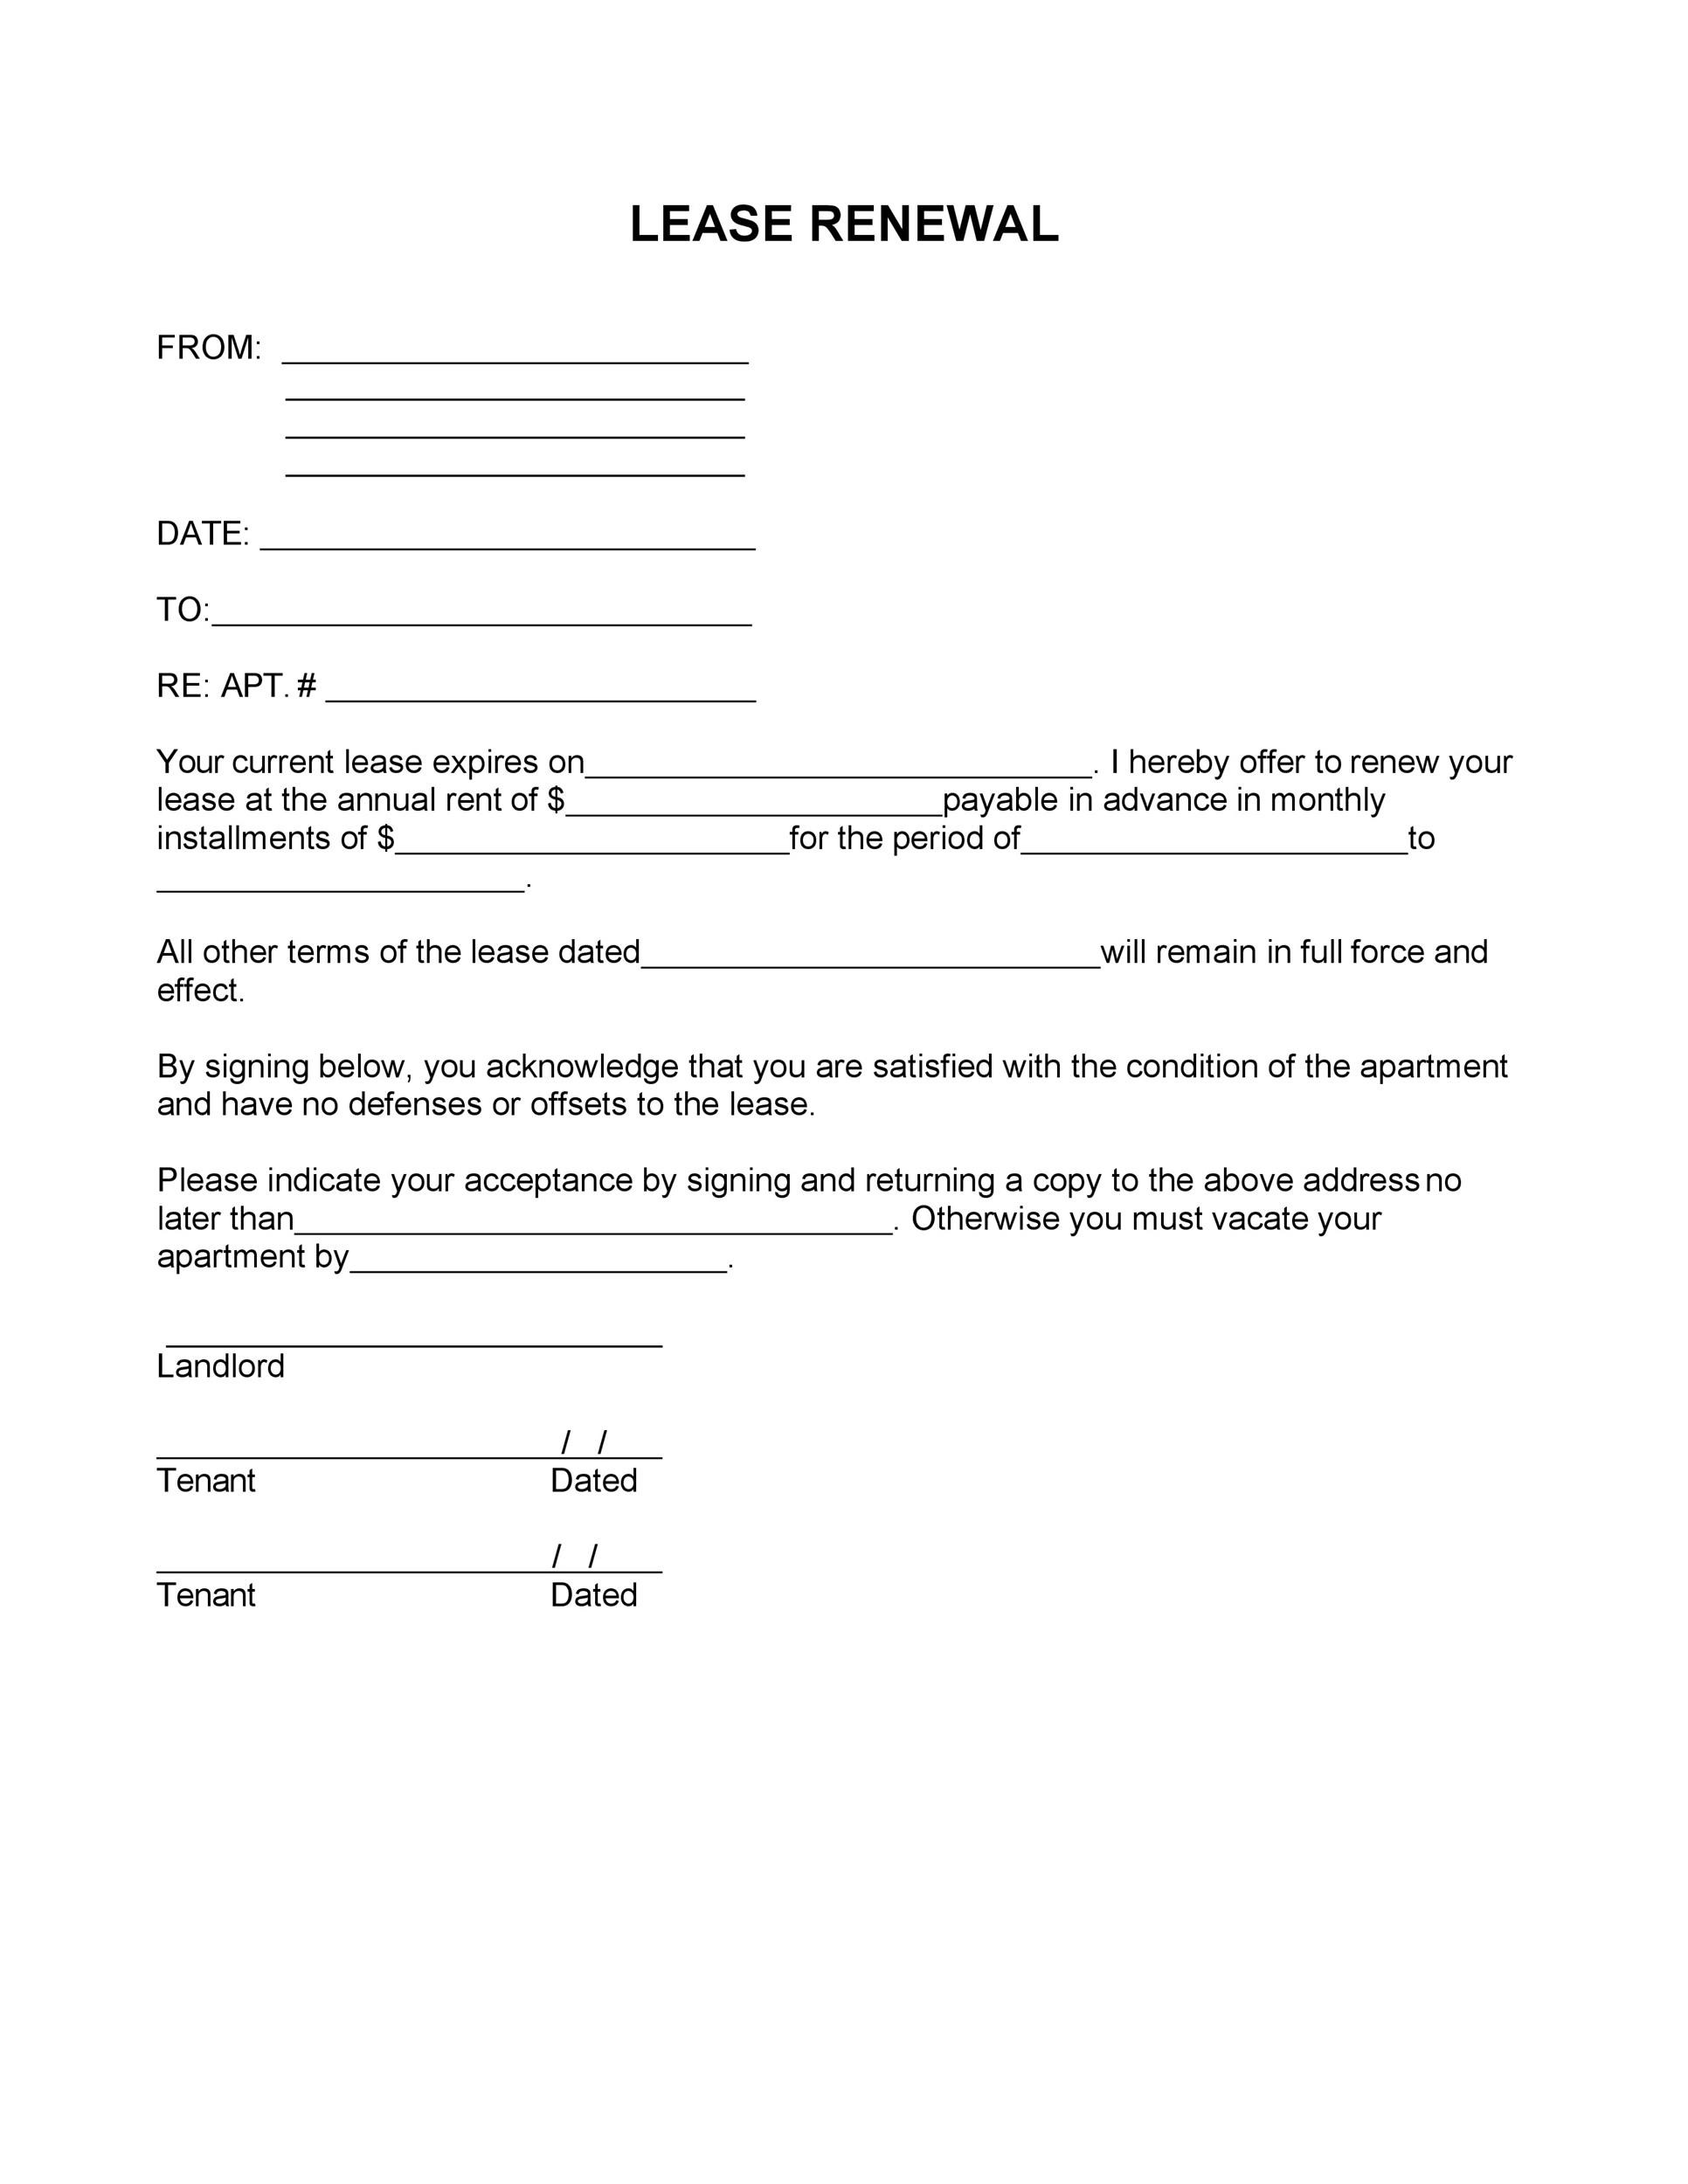 Free lease renewal letter 06